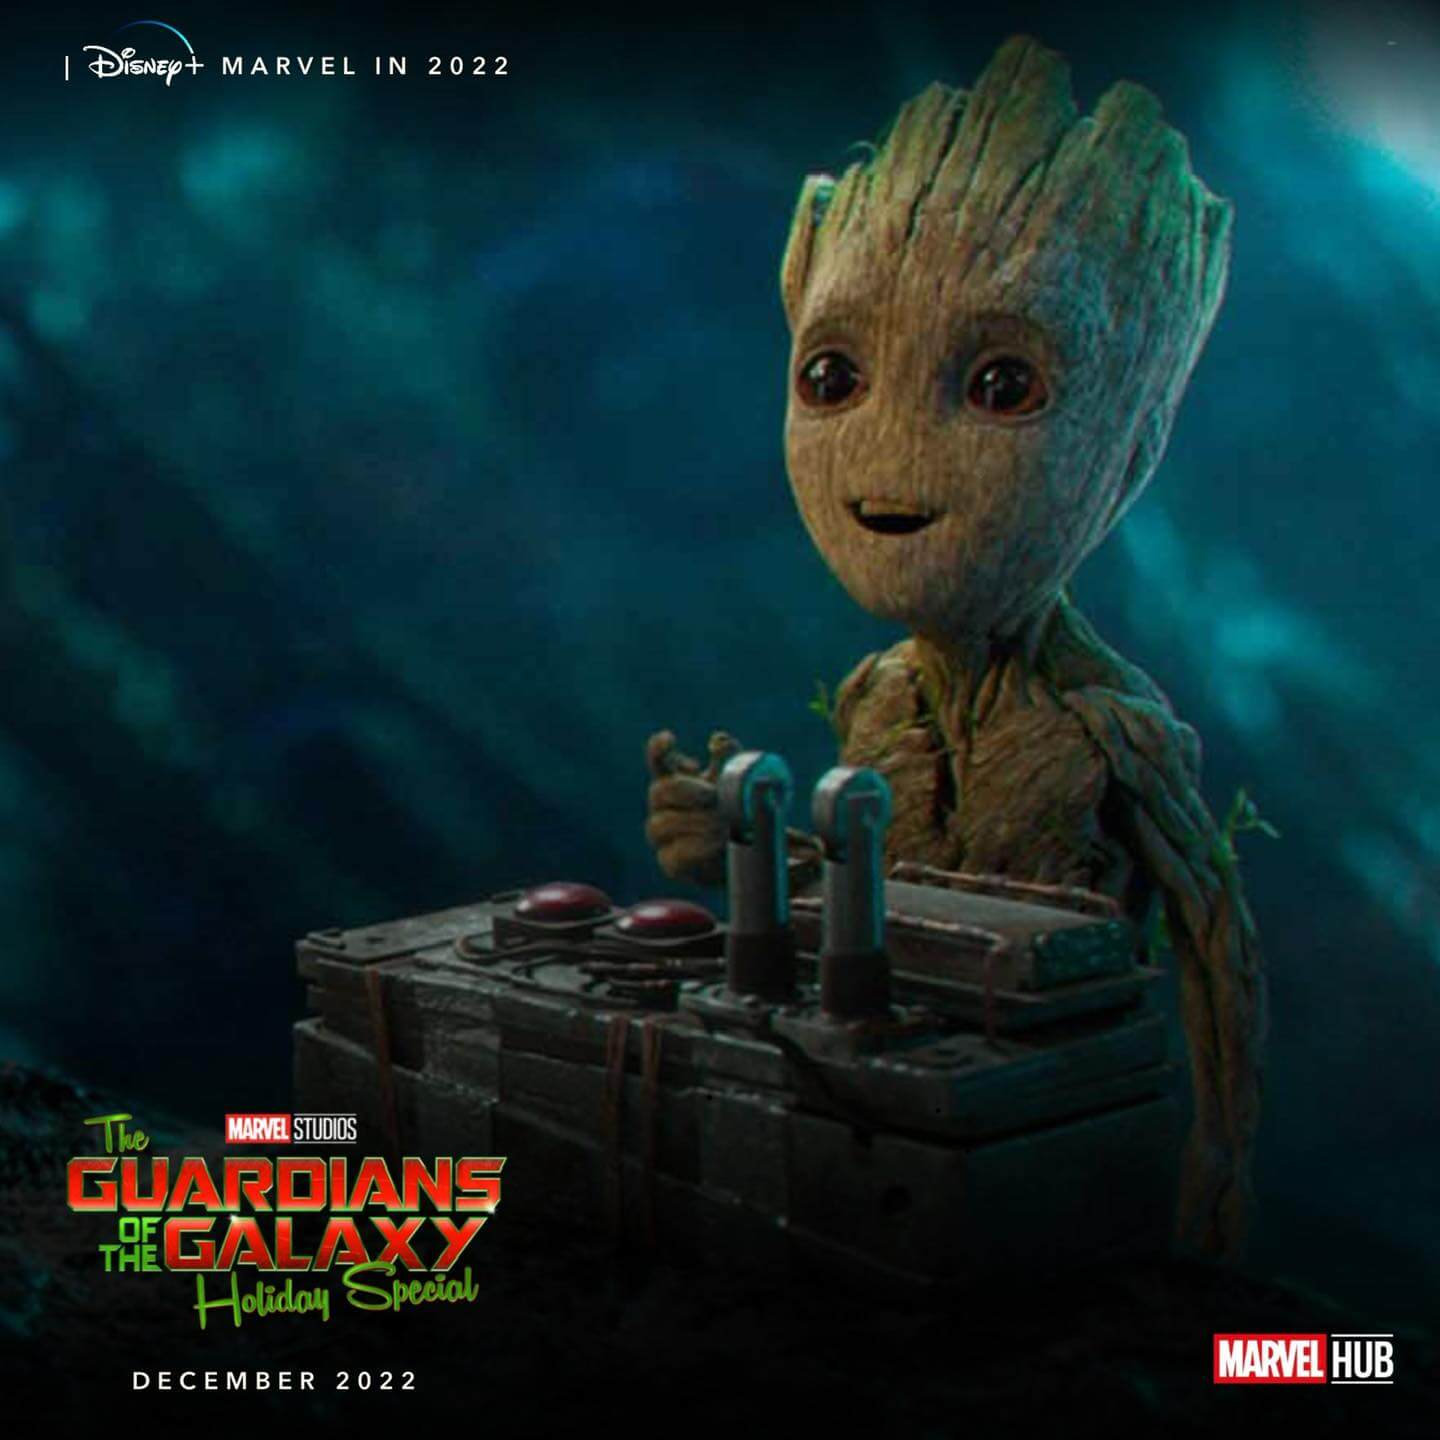 phim marvel 2022 9 the guardians of the galaxy